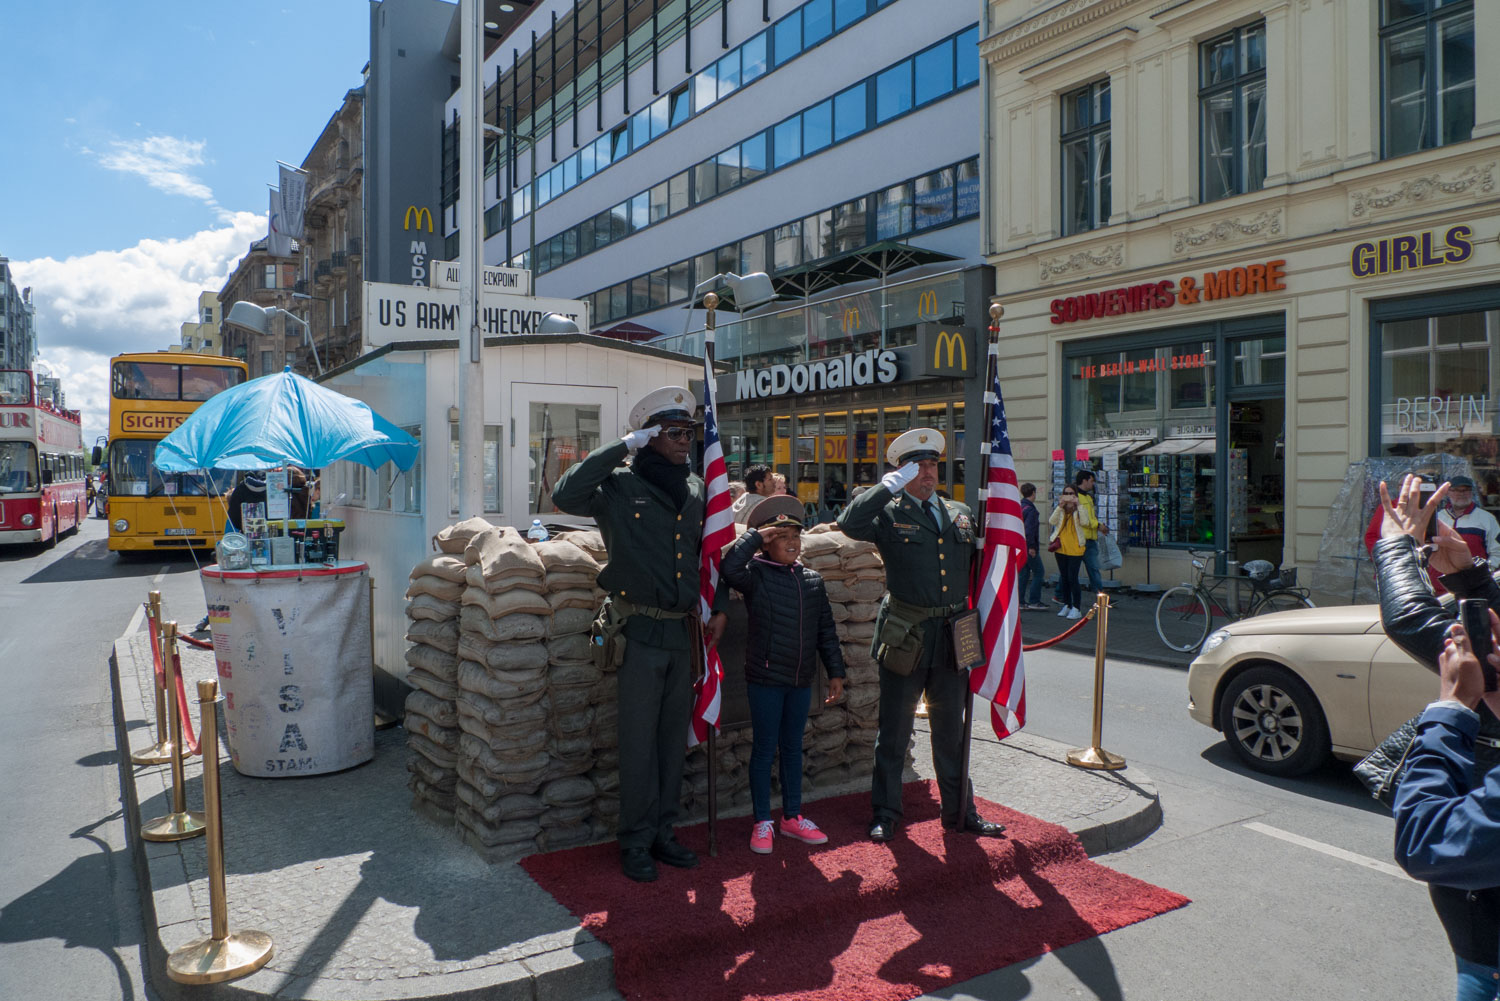 345. Checkpoint Charlie